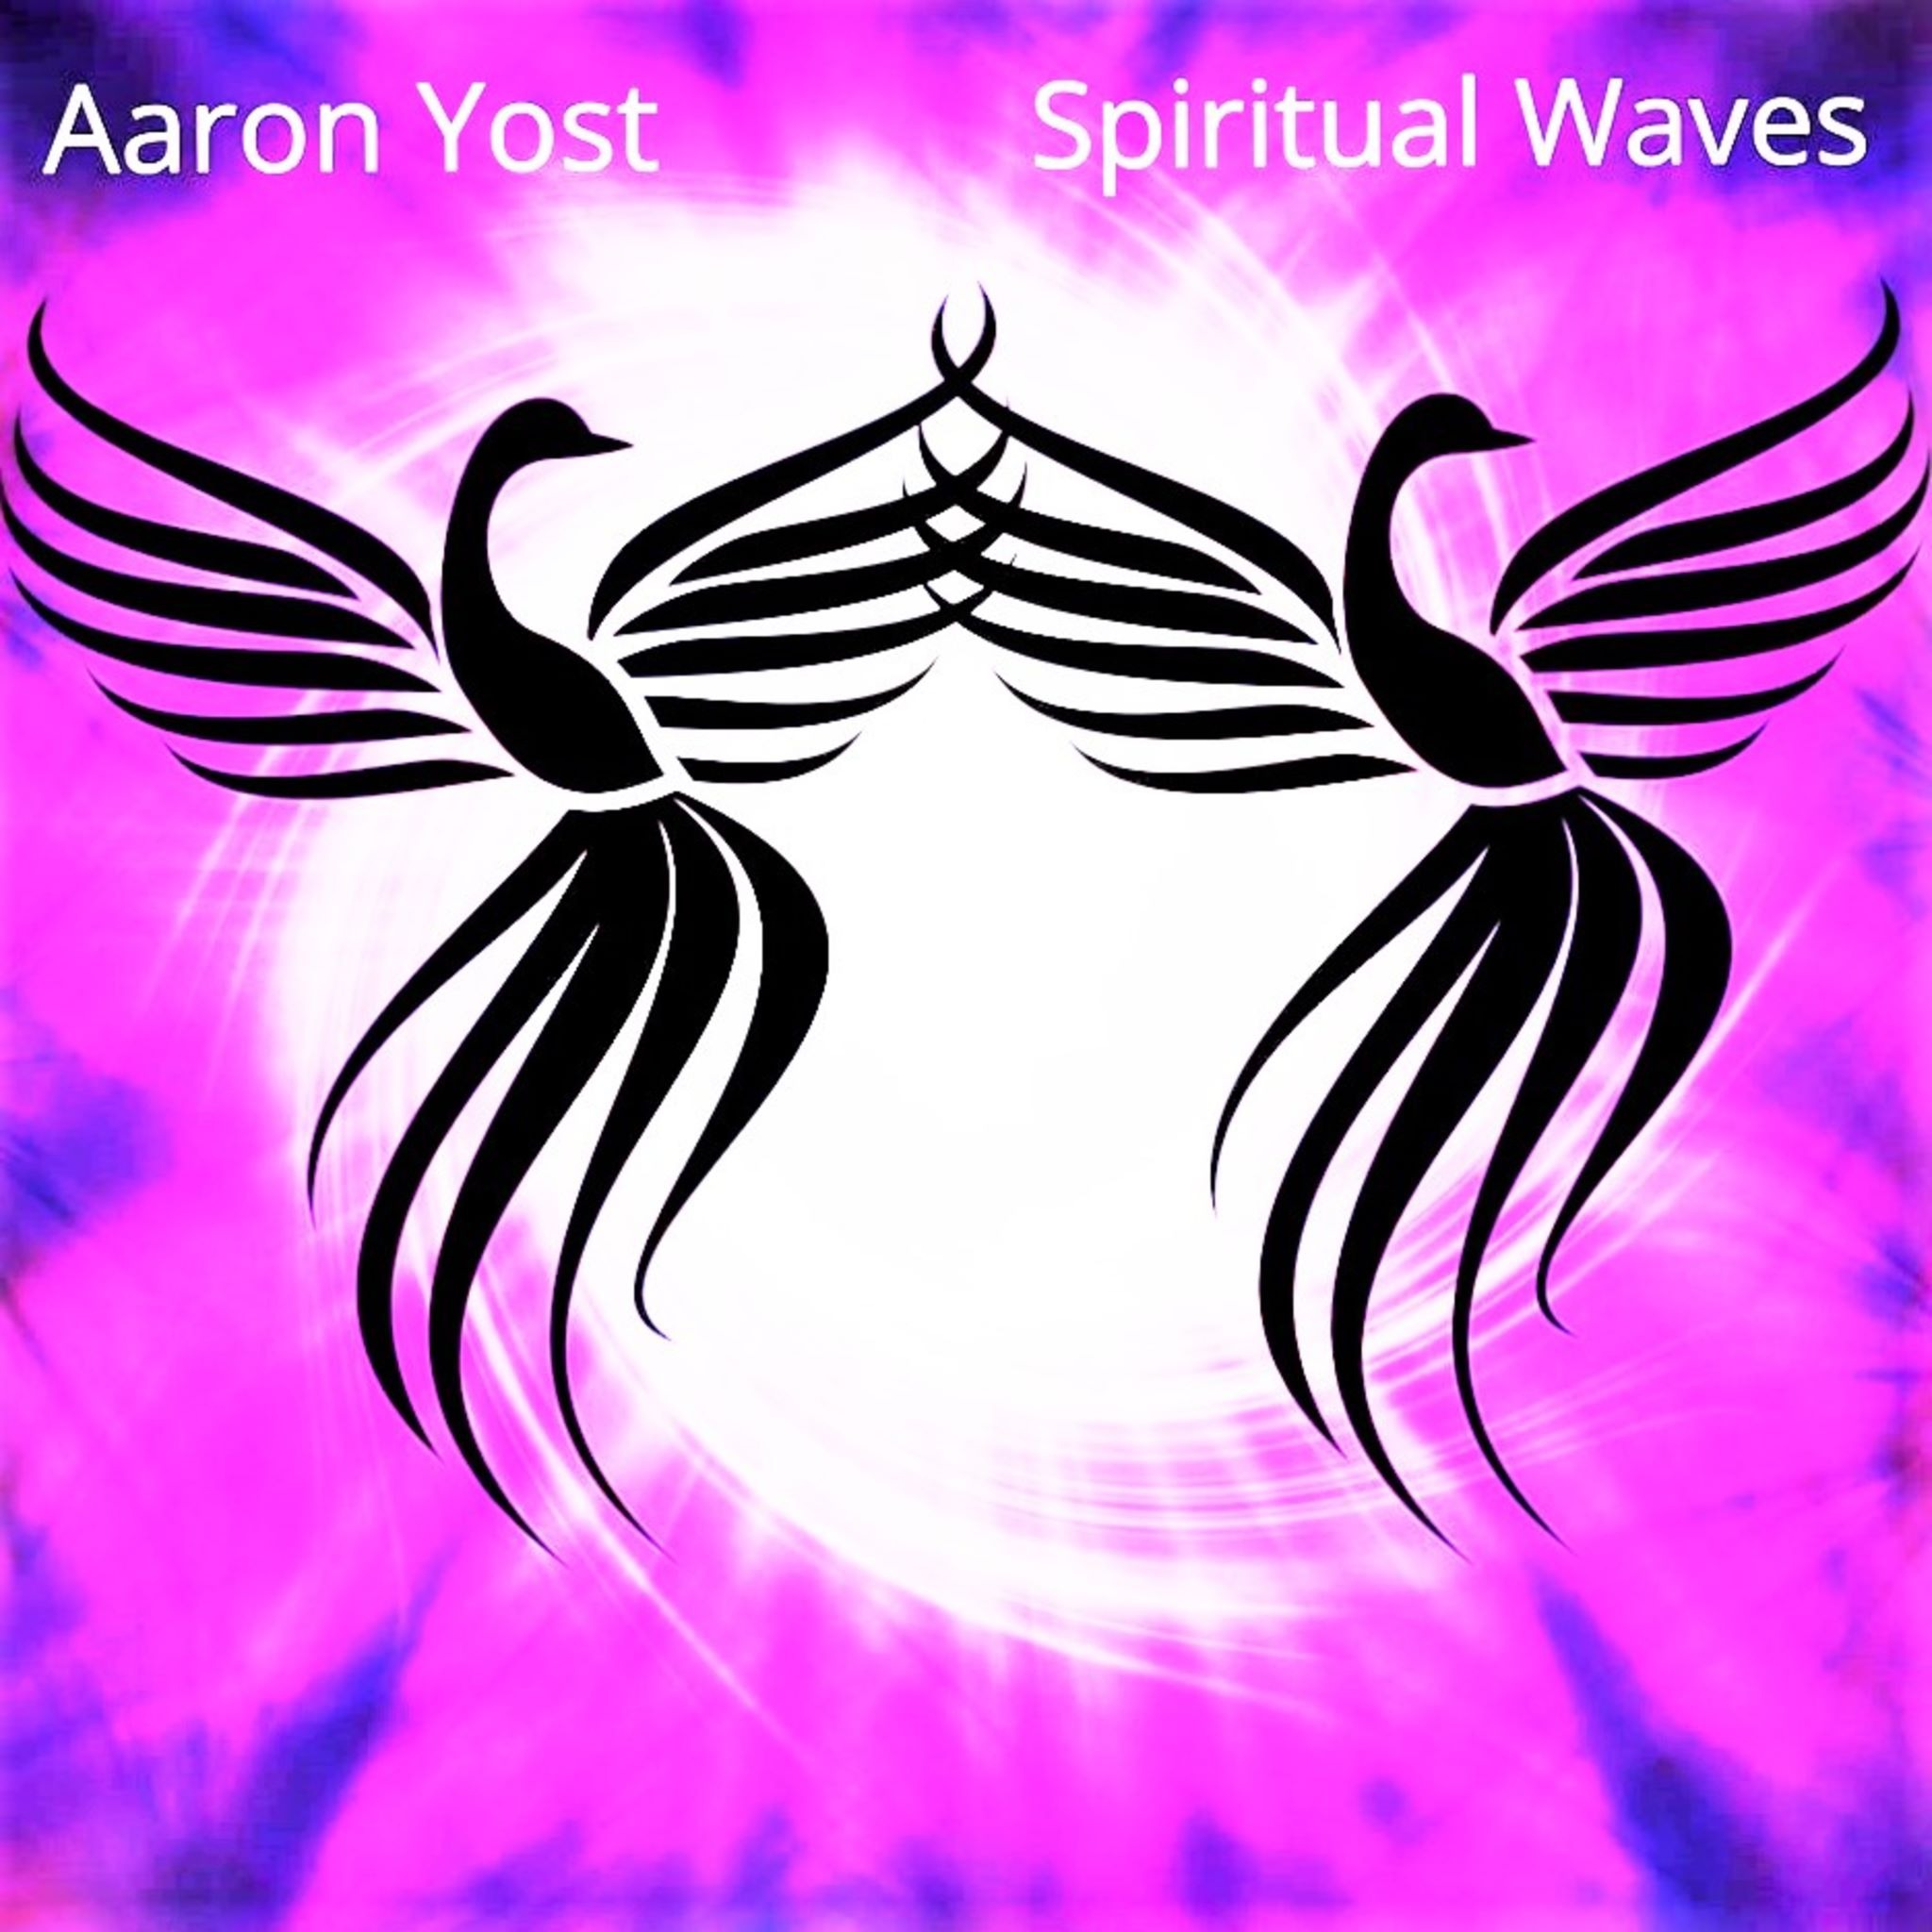 Taking Listeners to A New Realm of Music: Aaron Yost’s Spiritual Electronic Rock Is the Sound of Tomorrow